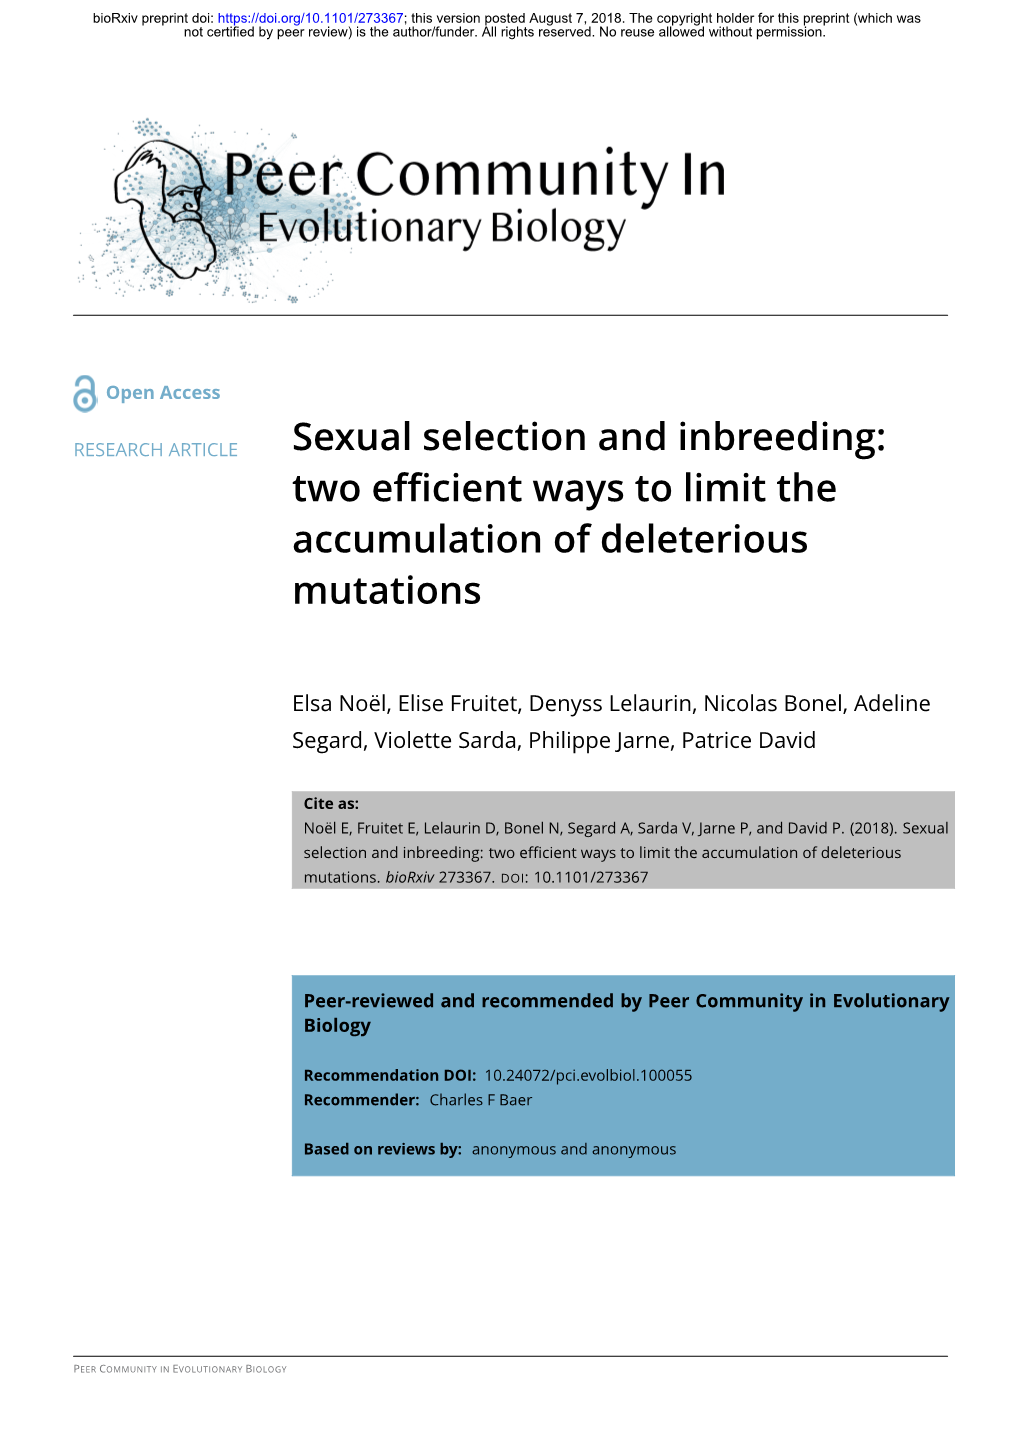 Sexual Selection and Inbreeding: Two Efficient Ways to Limit the Accumulation of Deleterious Mutations